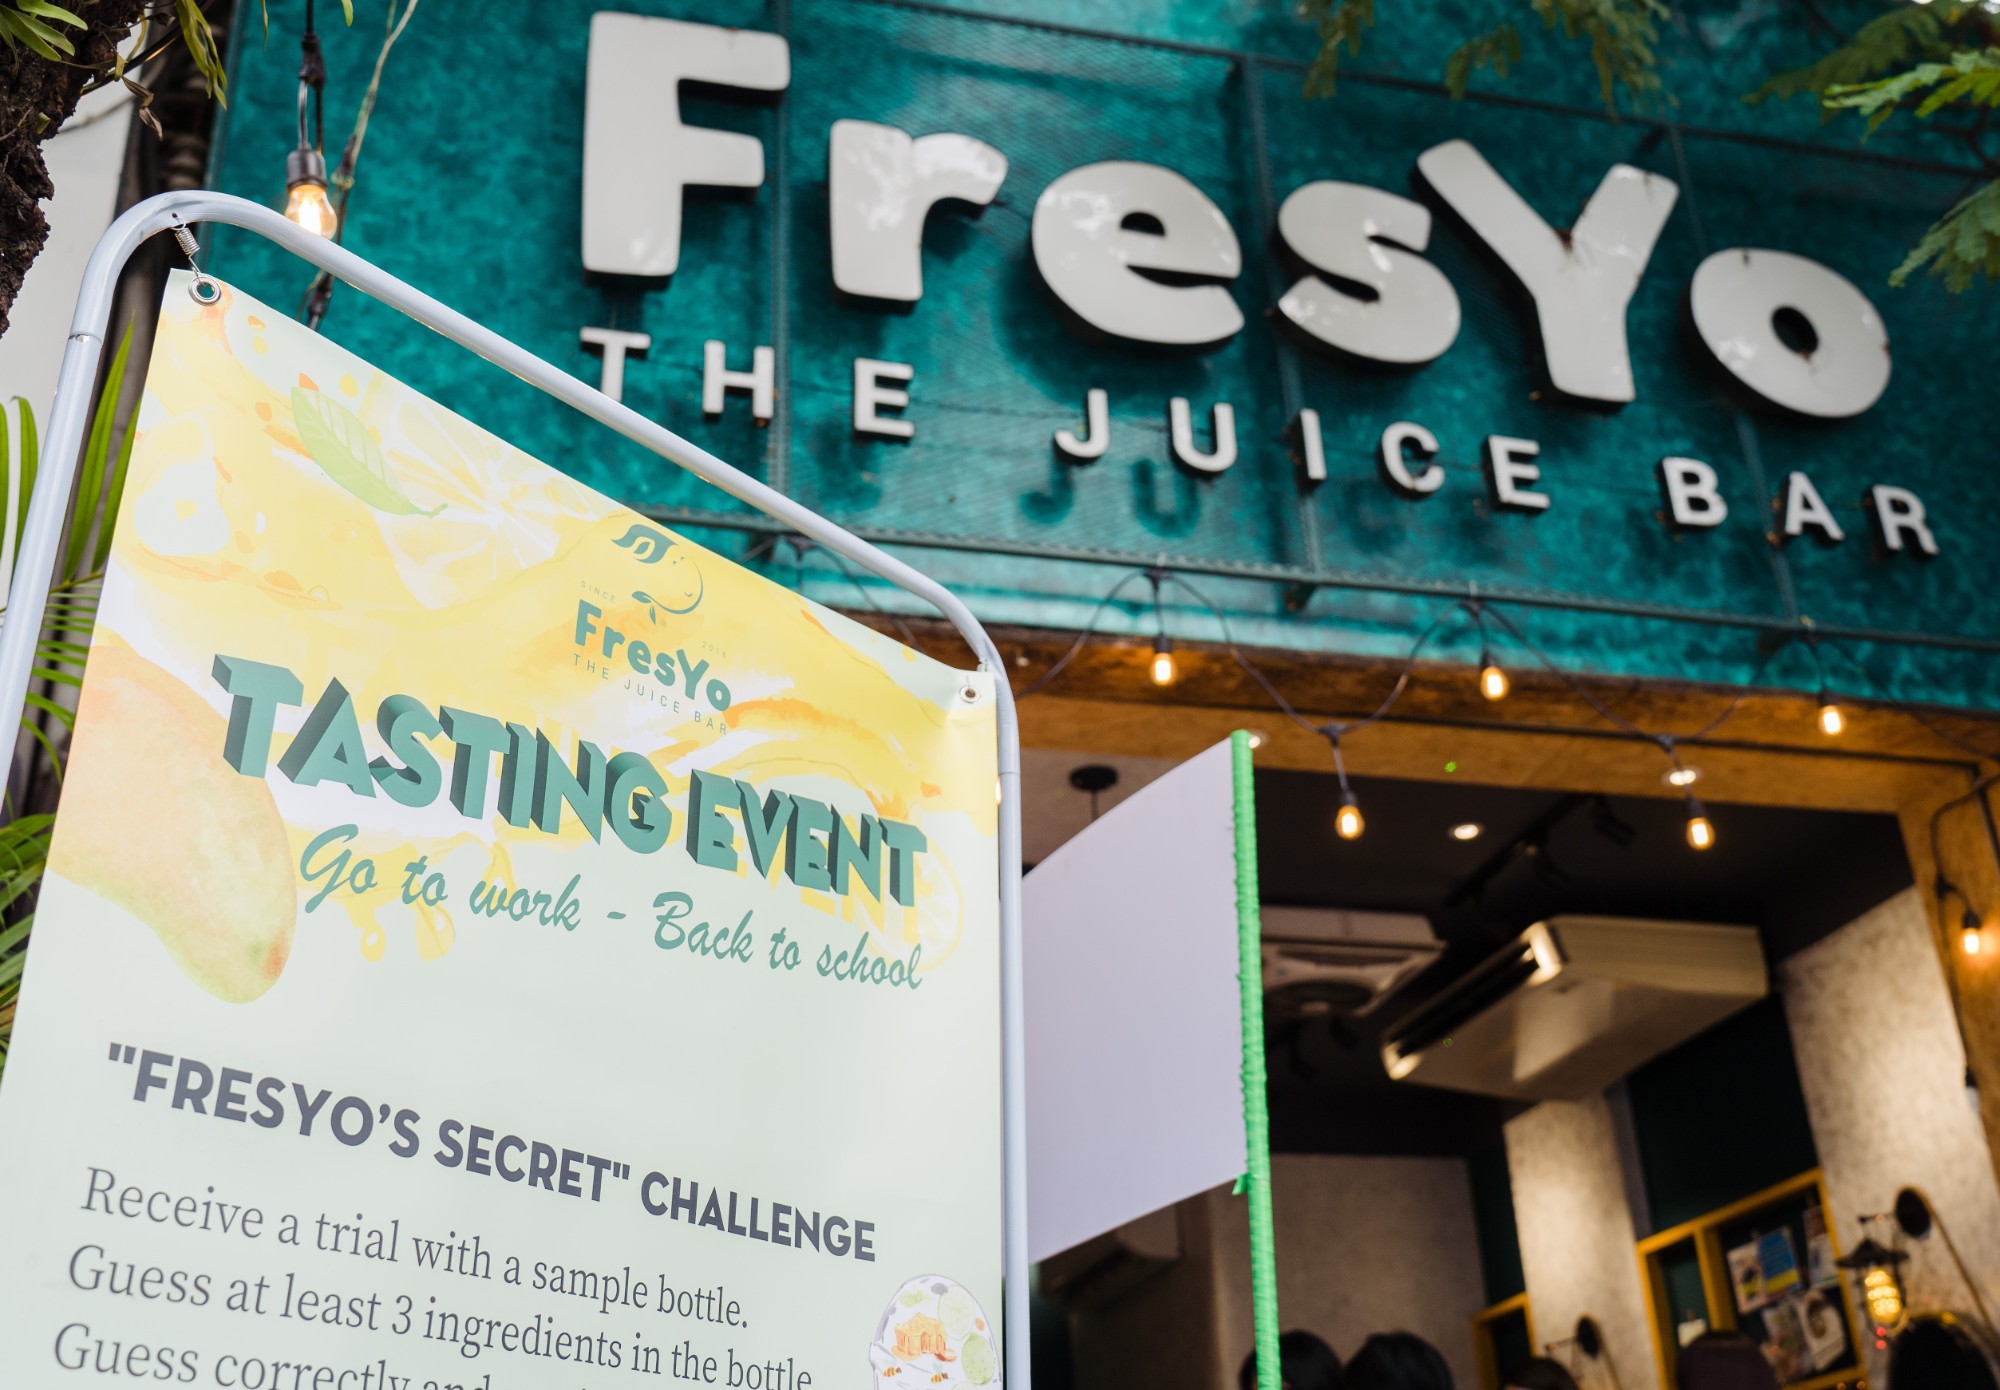 The event "Fresyo Smoothie Tasting" welcomes "Go 2 Work, Back 2 School."